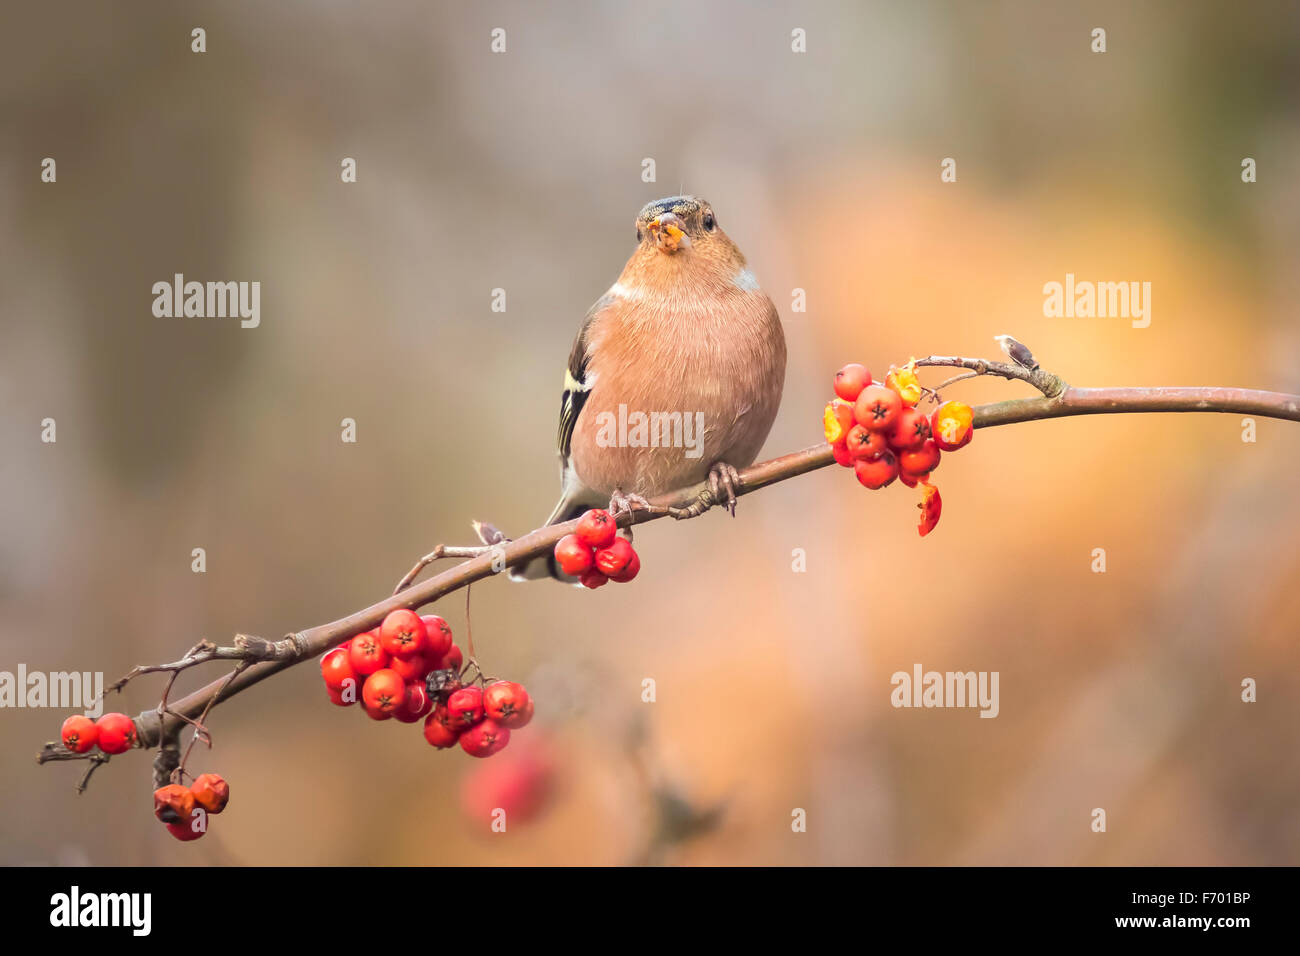 A male chaffinch, Fringilla coelebs, eating Sorbus, rowan, berries from a tree. Fall colors are clearly visible. Stock Photo